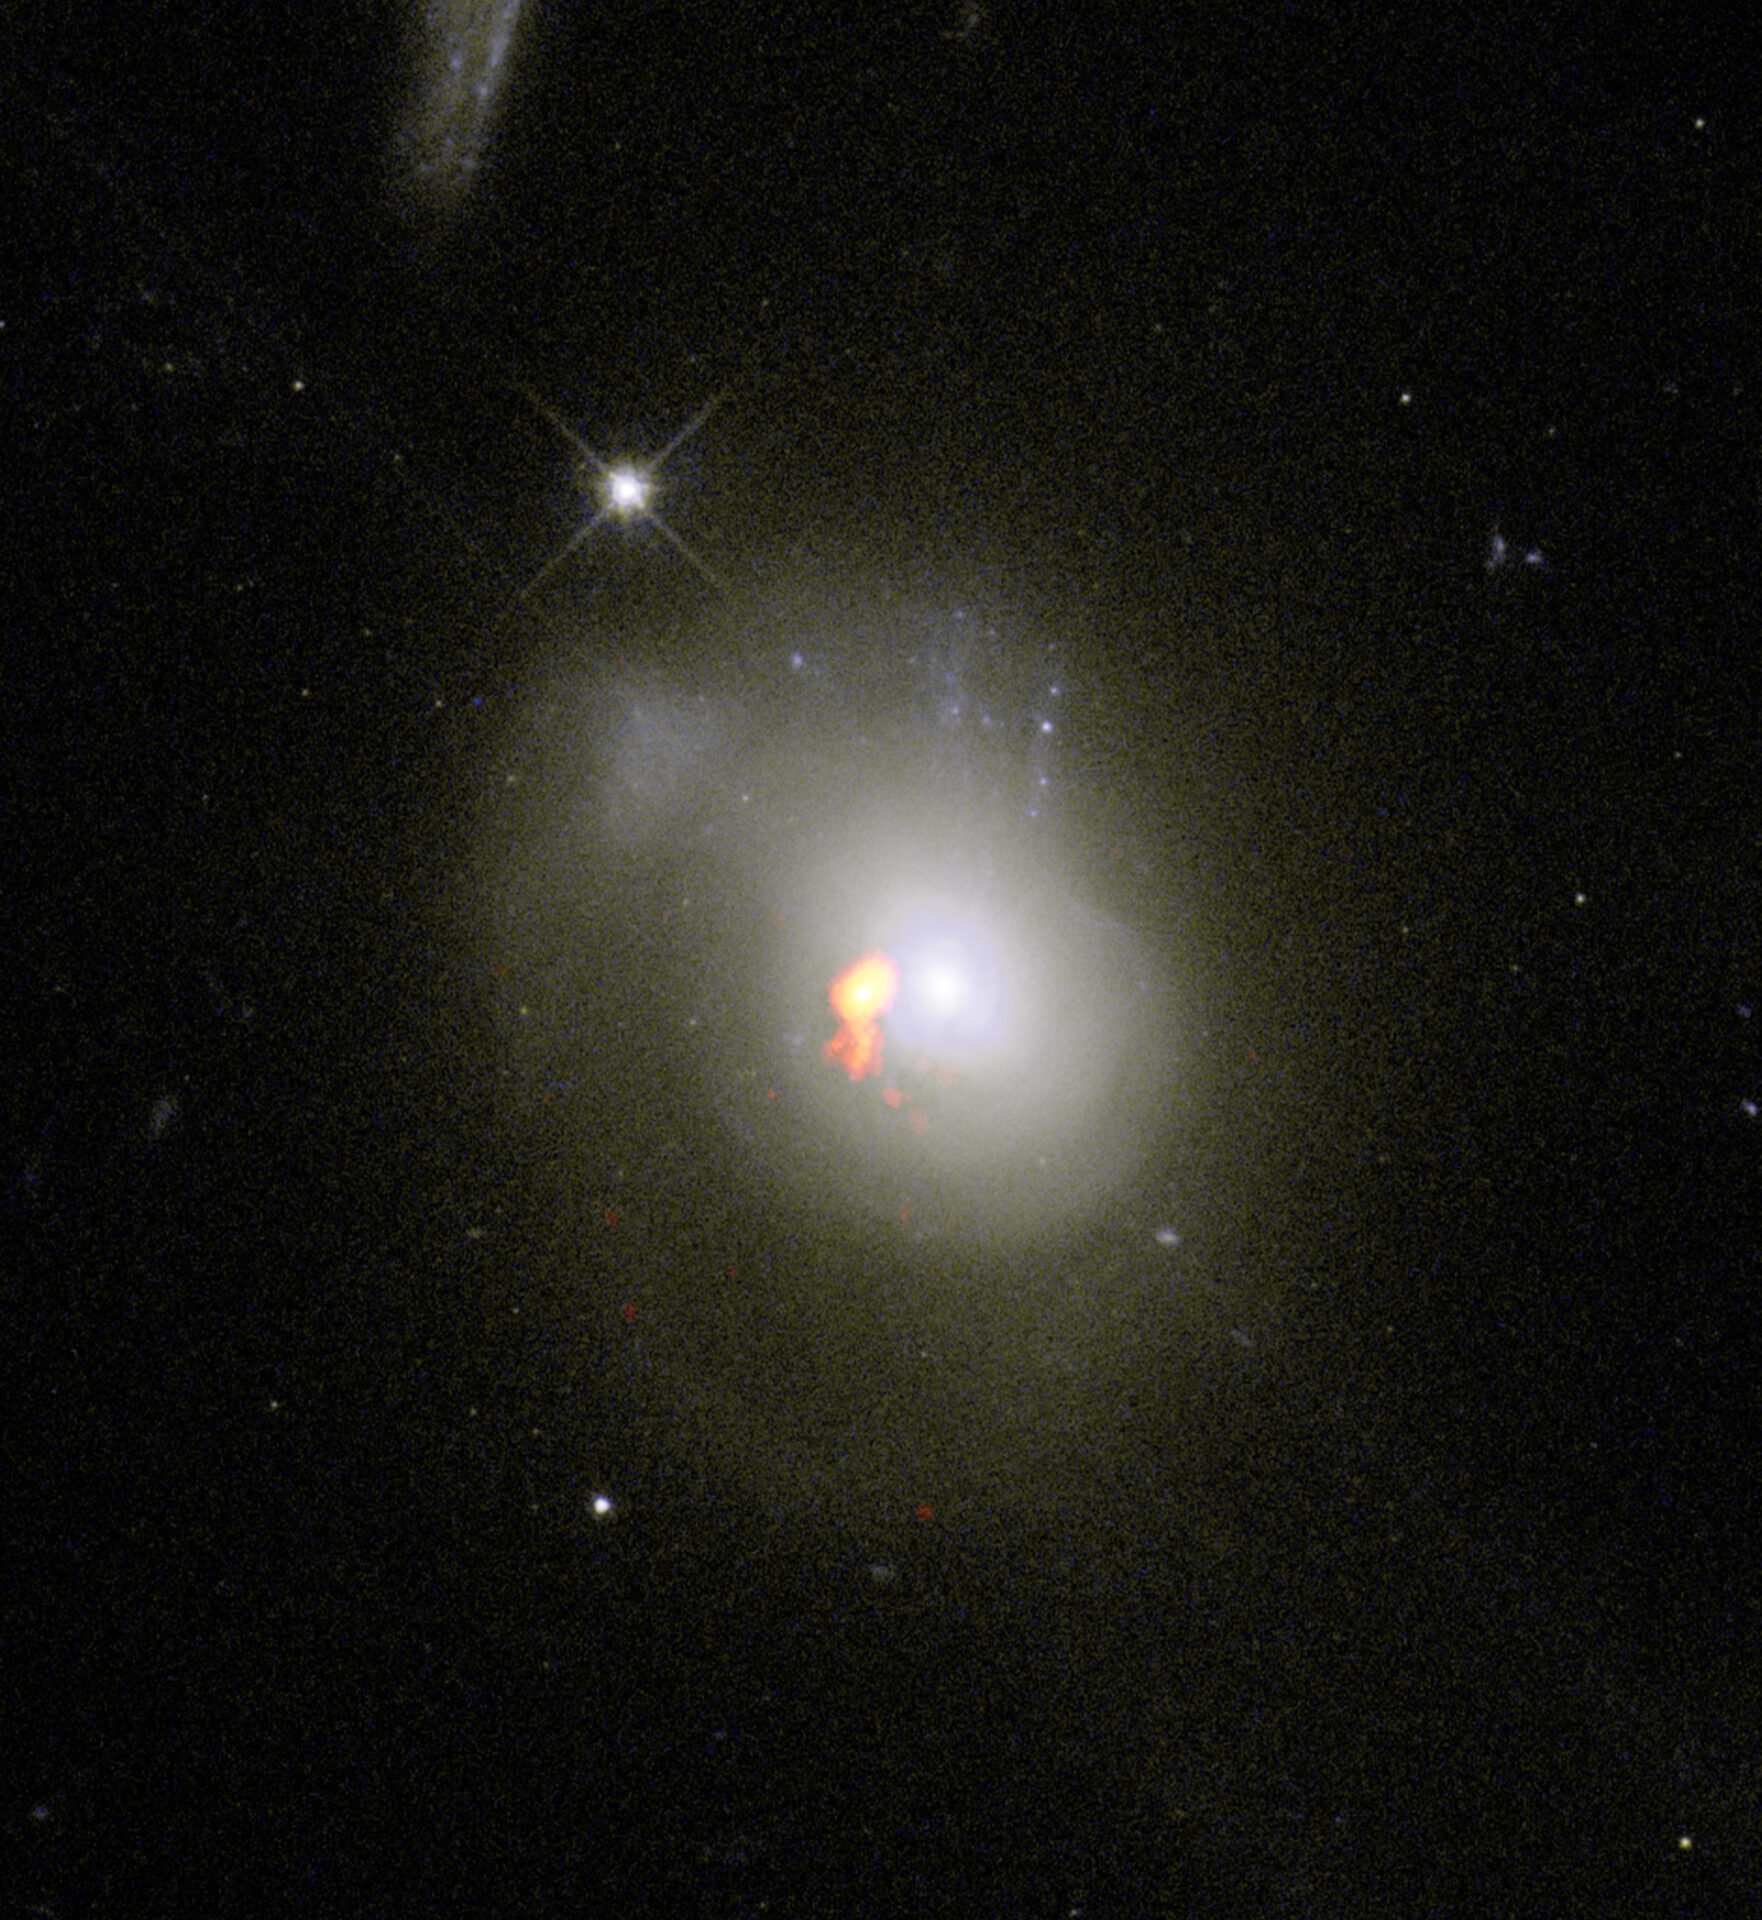 <p>Scientists studying post-starburst galaxies, or PSBs, found that they don't behave as expected. PSBs were previously believed to scatter their gas as they become dormant. New observations have revealed that these galaxies actually hang onto this gas and compact it near to their centers. PSB 0379.579.51789 is the one exception in the study. Here, radio data of the galaxy overlaid on optical images from the Hubble Space Telescope reveal that while the galaxy did hold onto its star-forming fuel, the collection of gas is located off-center. Credit: ALMA (ESO/NAOJ/NRAO) / S. Dagnello (NRAO/AUI/NSF)</p>
